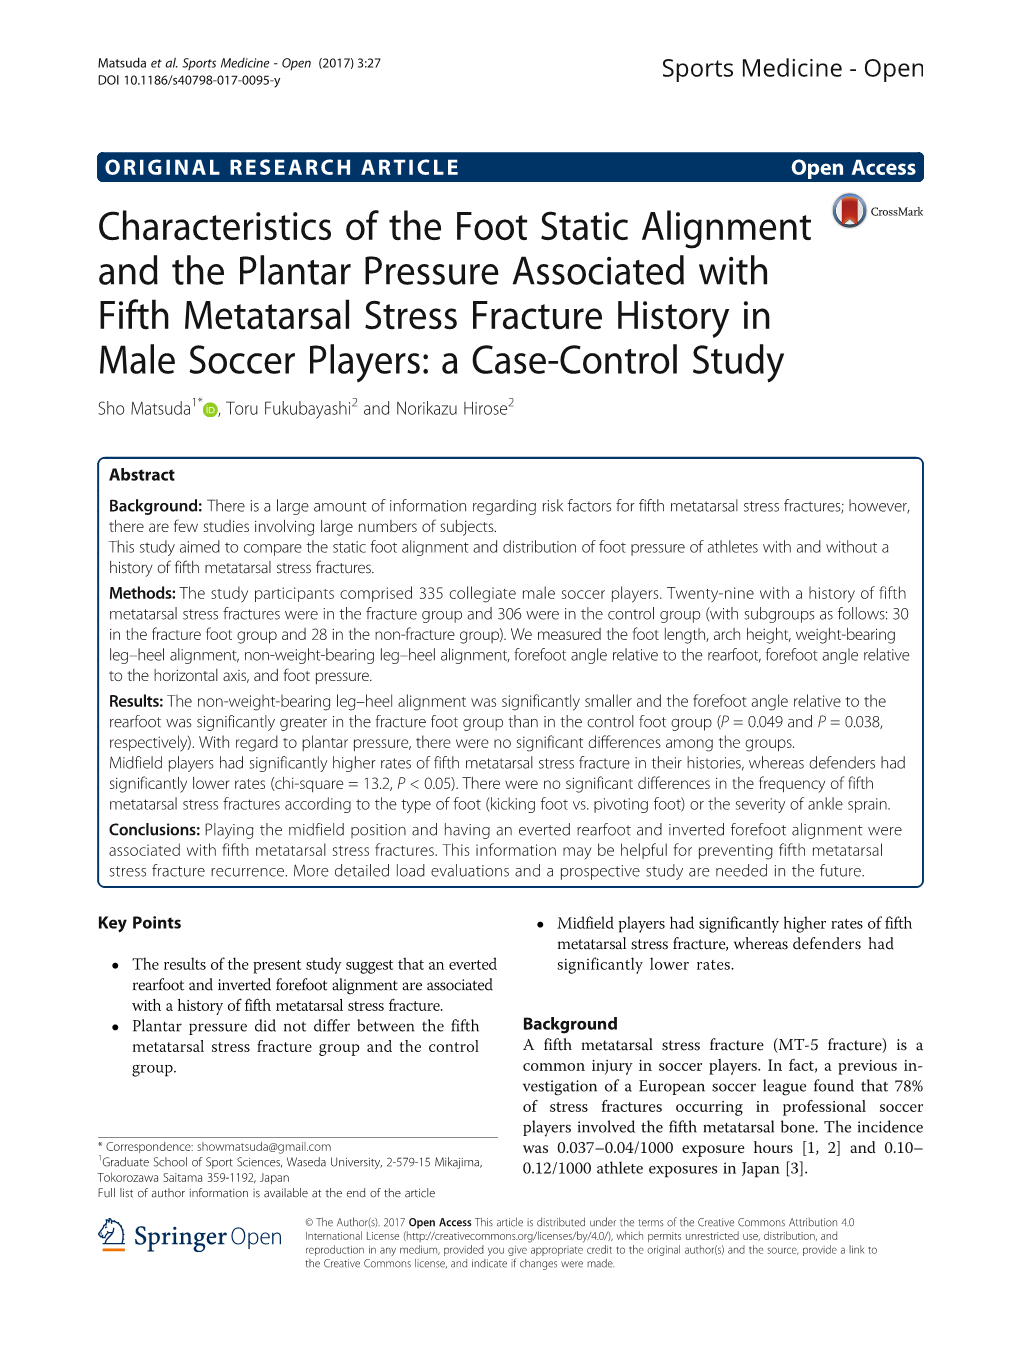 Characteristics of the Foot Static Alignment and the Plantar Pressure Associated with Fifth Metatarsal Stress Fracture History I